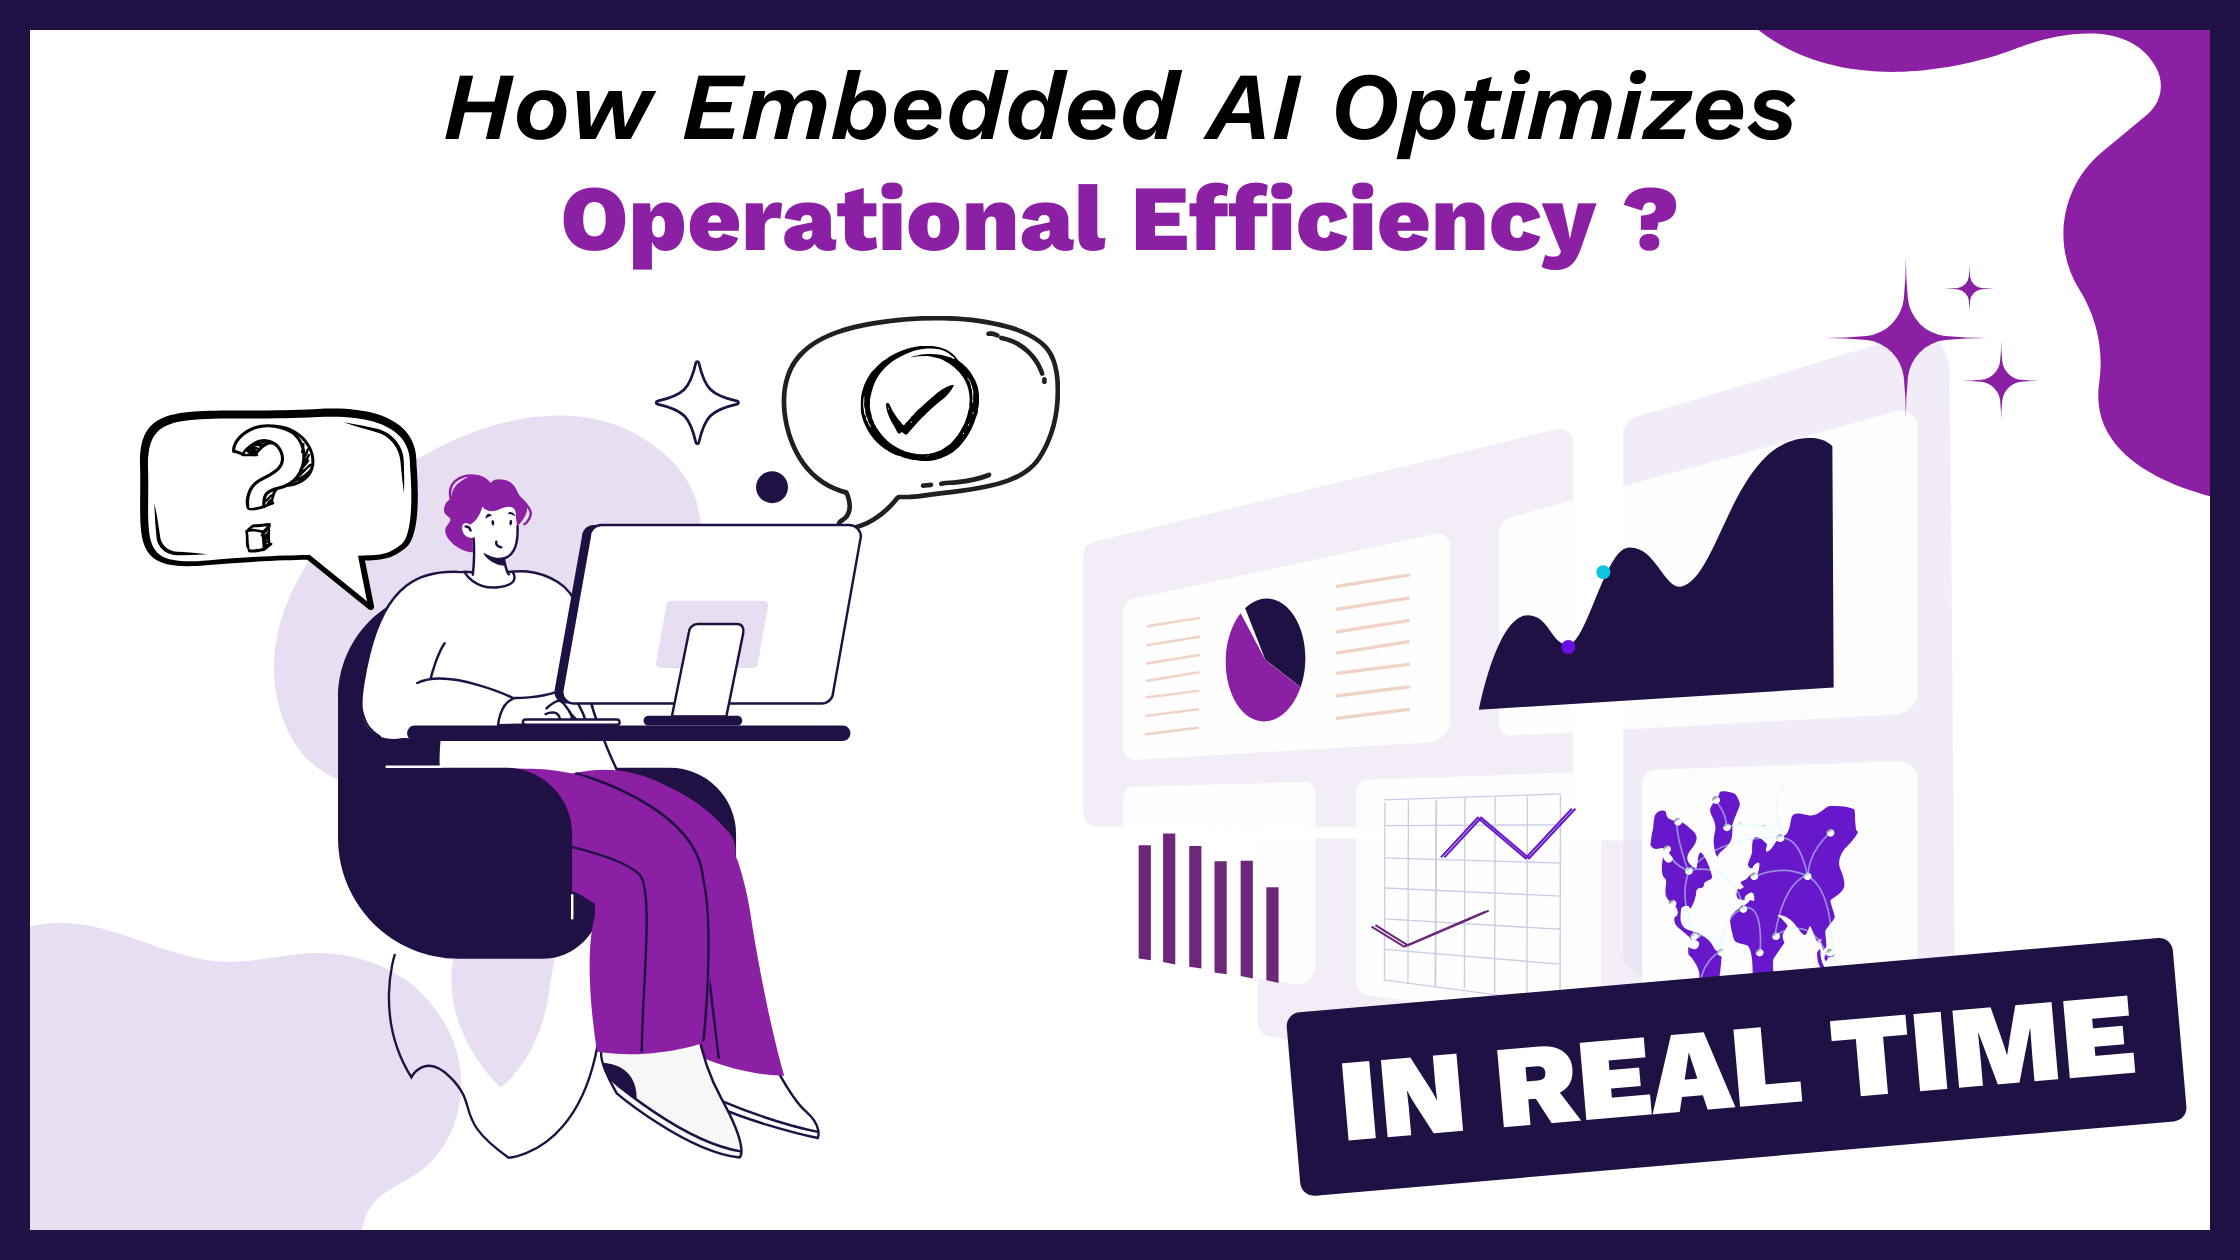 How Embedded AI Optimizes Operational Efficiency